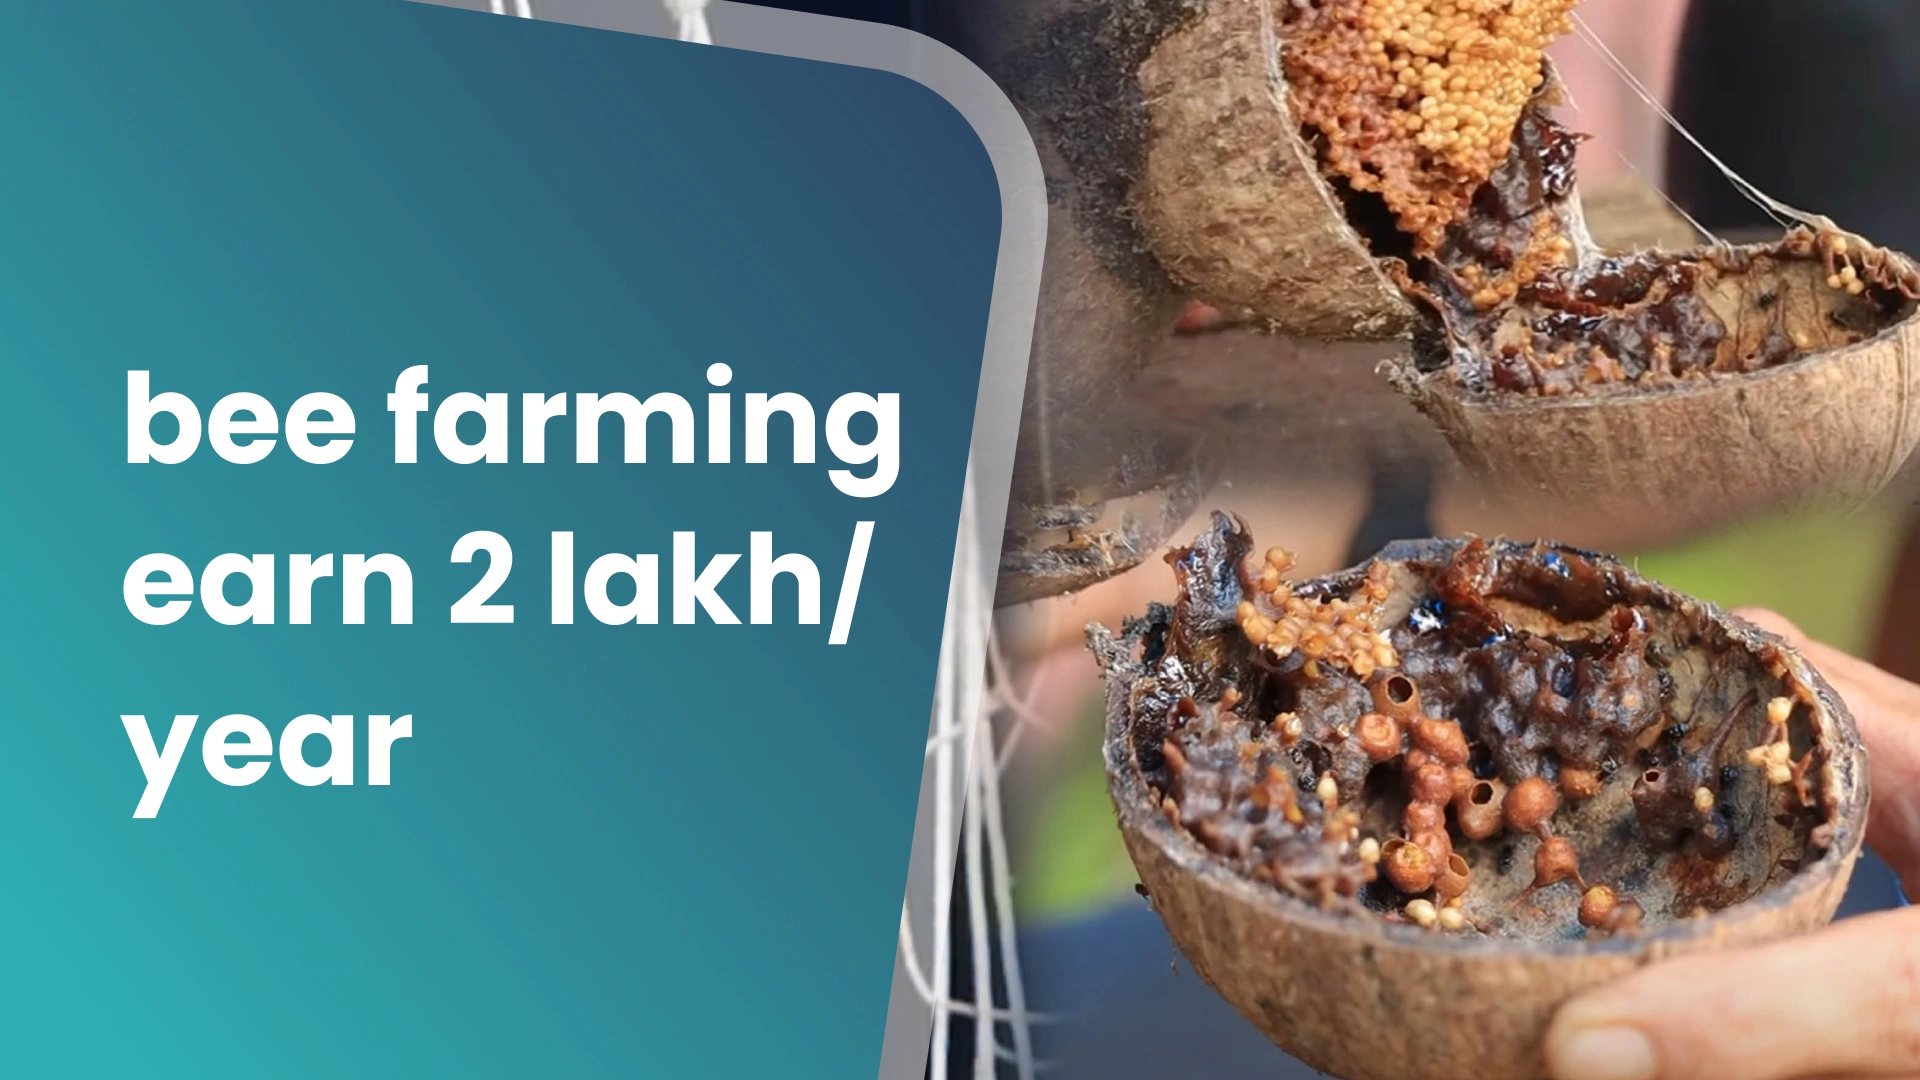 Course Trailer: Stingless Bee Farming Course - Earn up to 2 lakh/year from 150 boxes. Watch to know more.